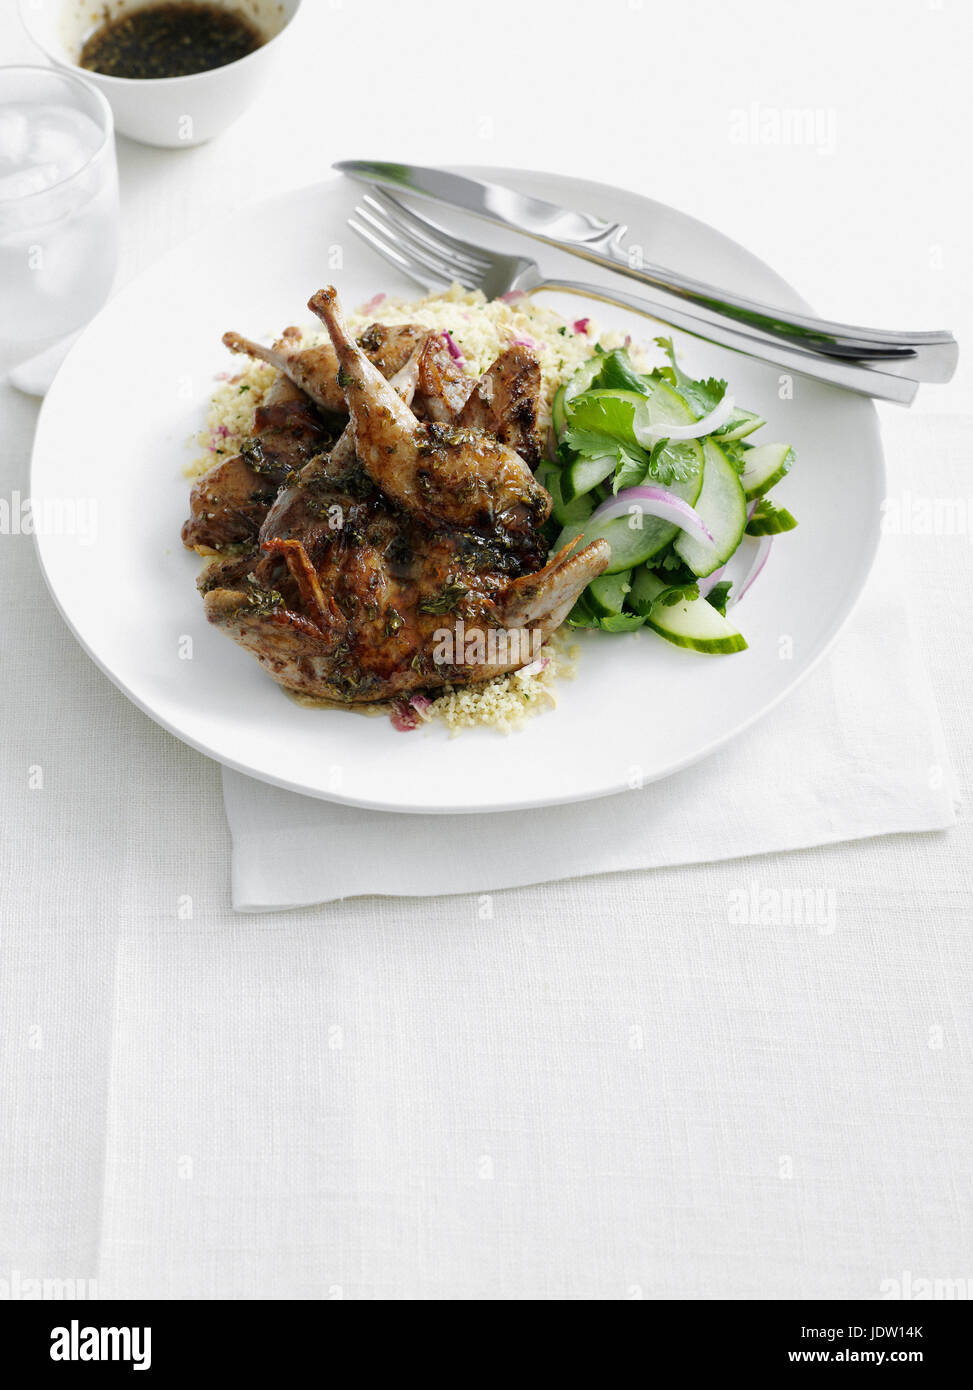 Plate of chicken with rice and salad Stock Photo